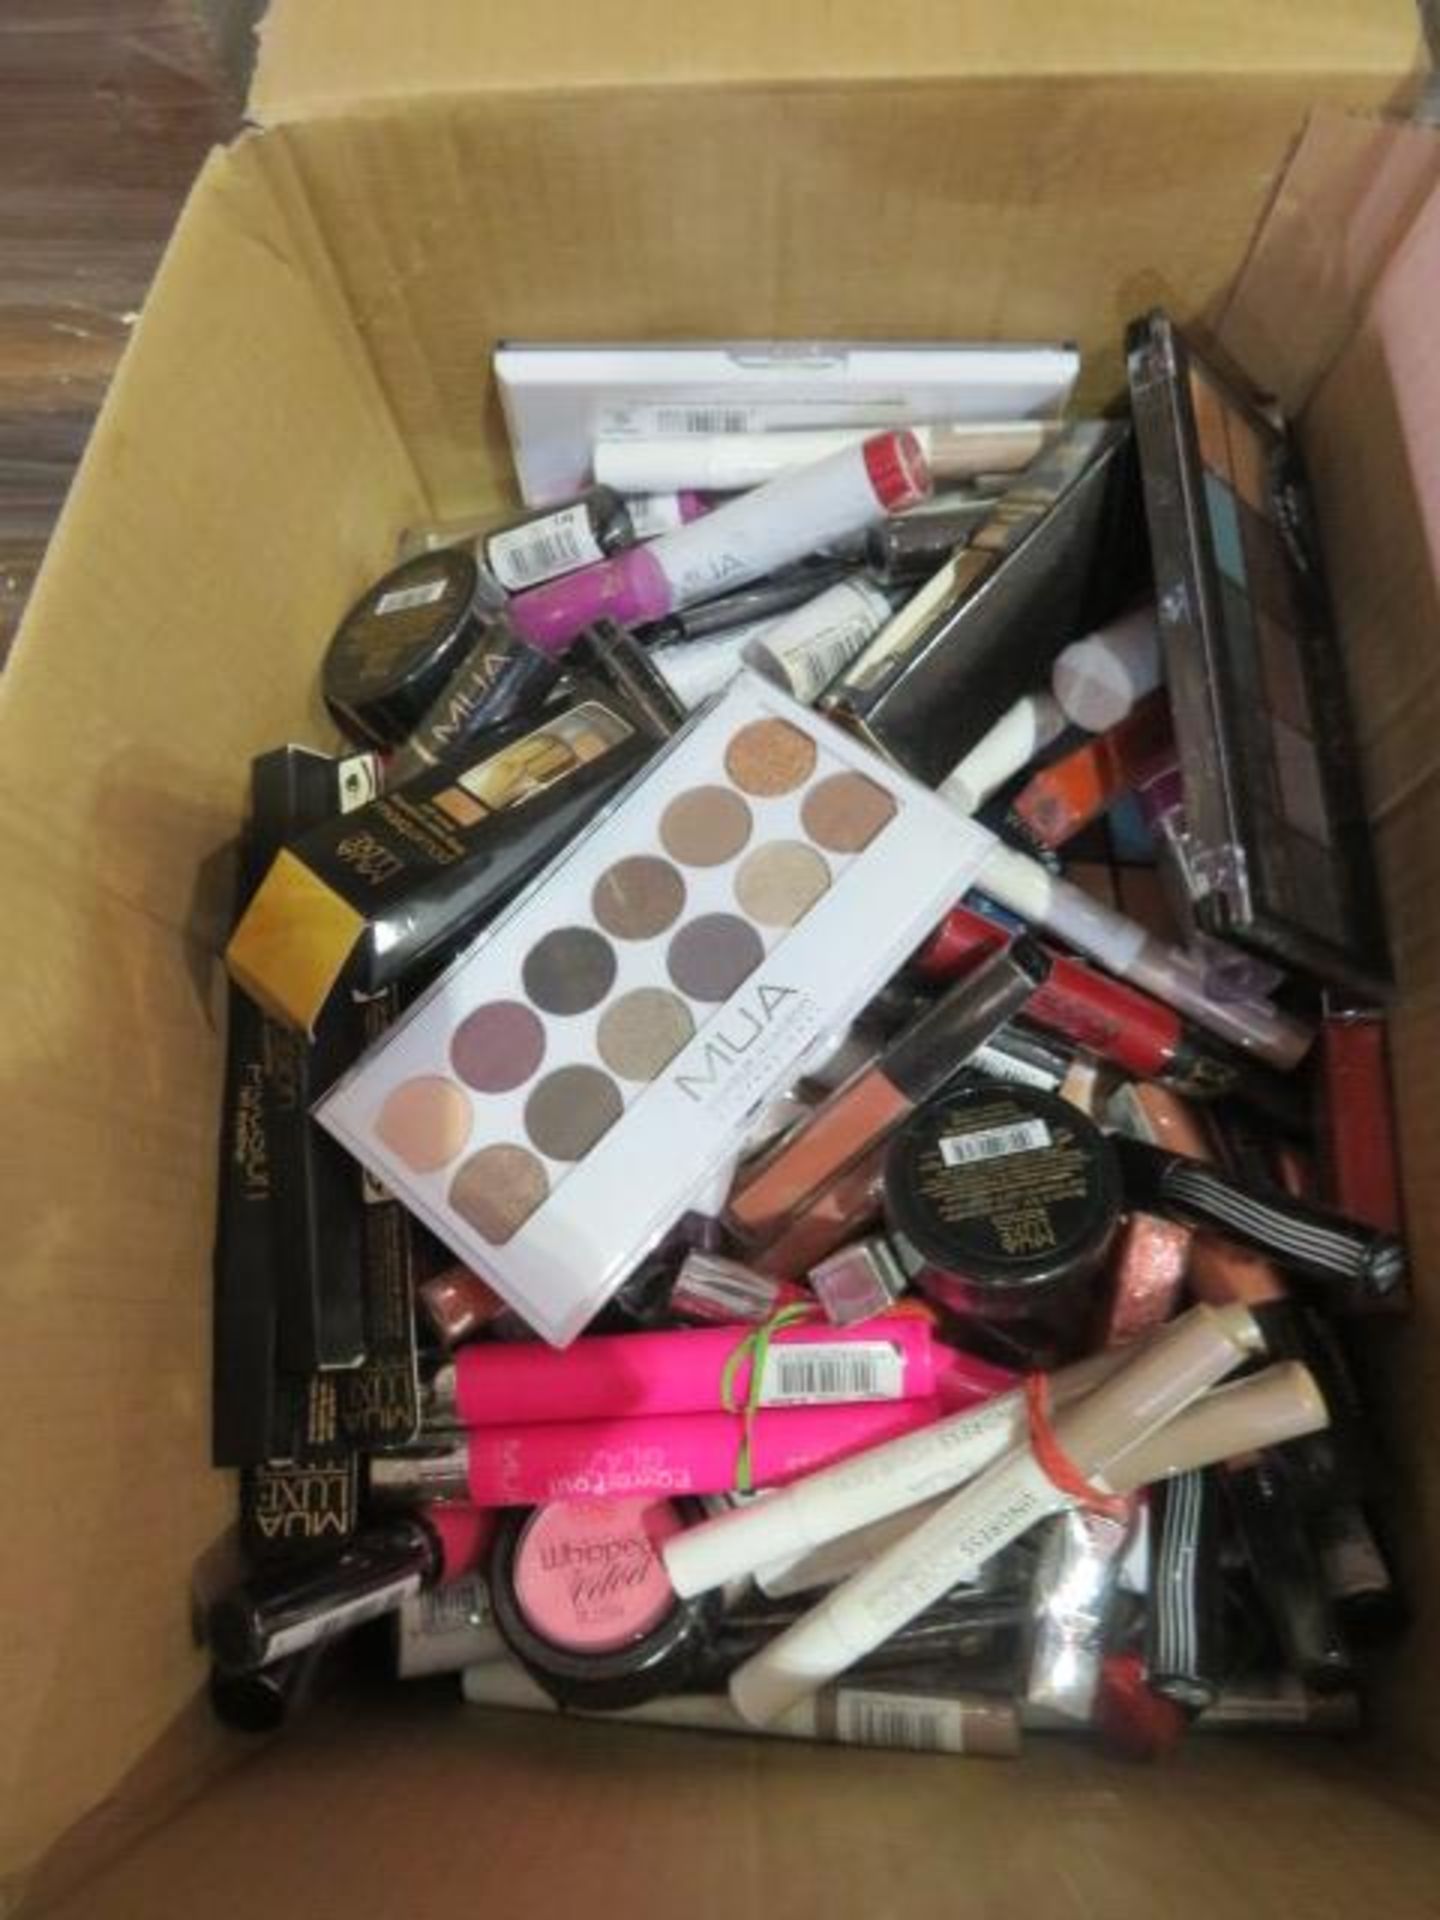 (Z13) Circa. 200 items of various new make up acadamy make up to include: lipstick, power brow ...